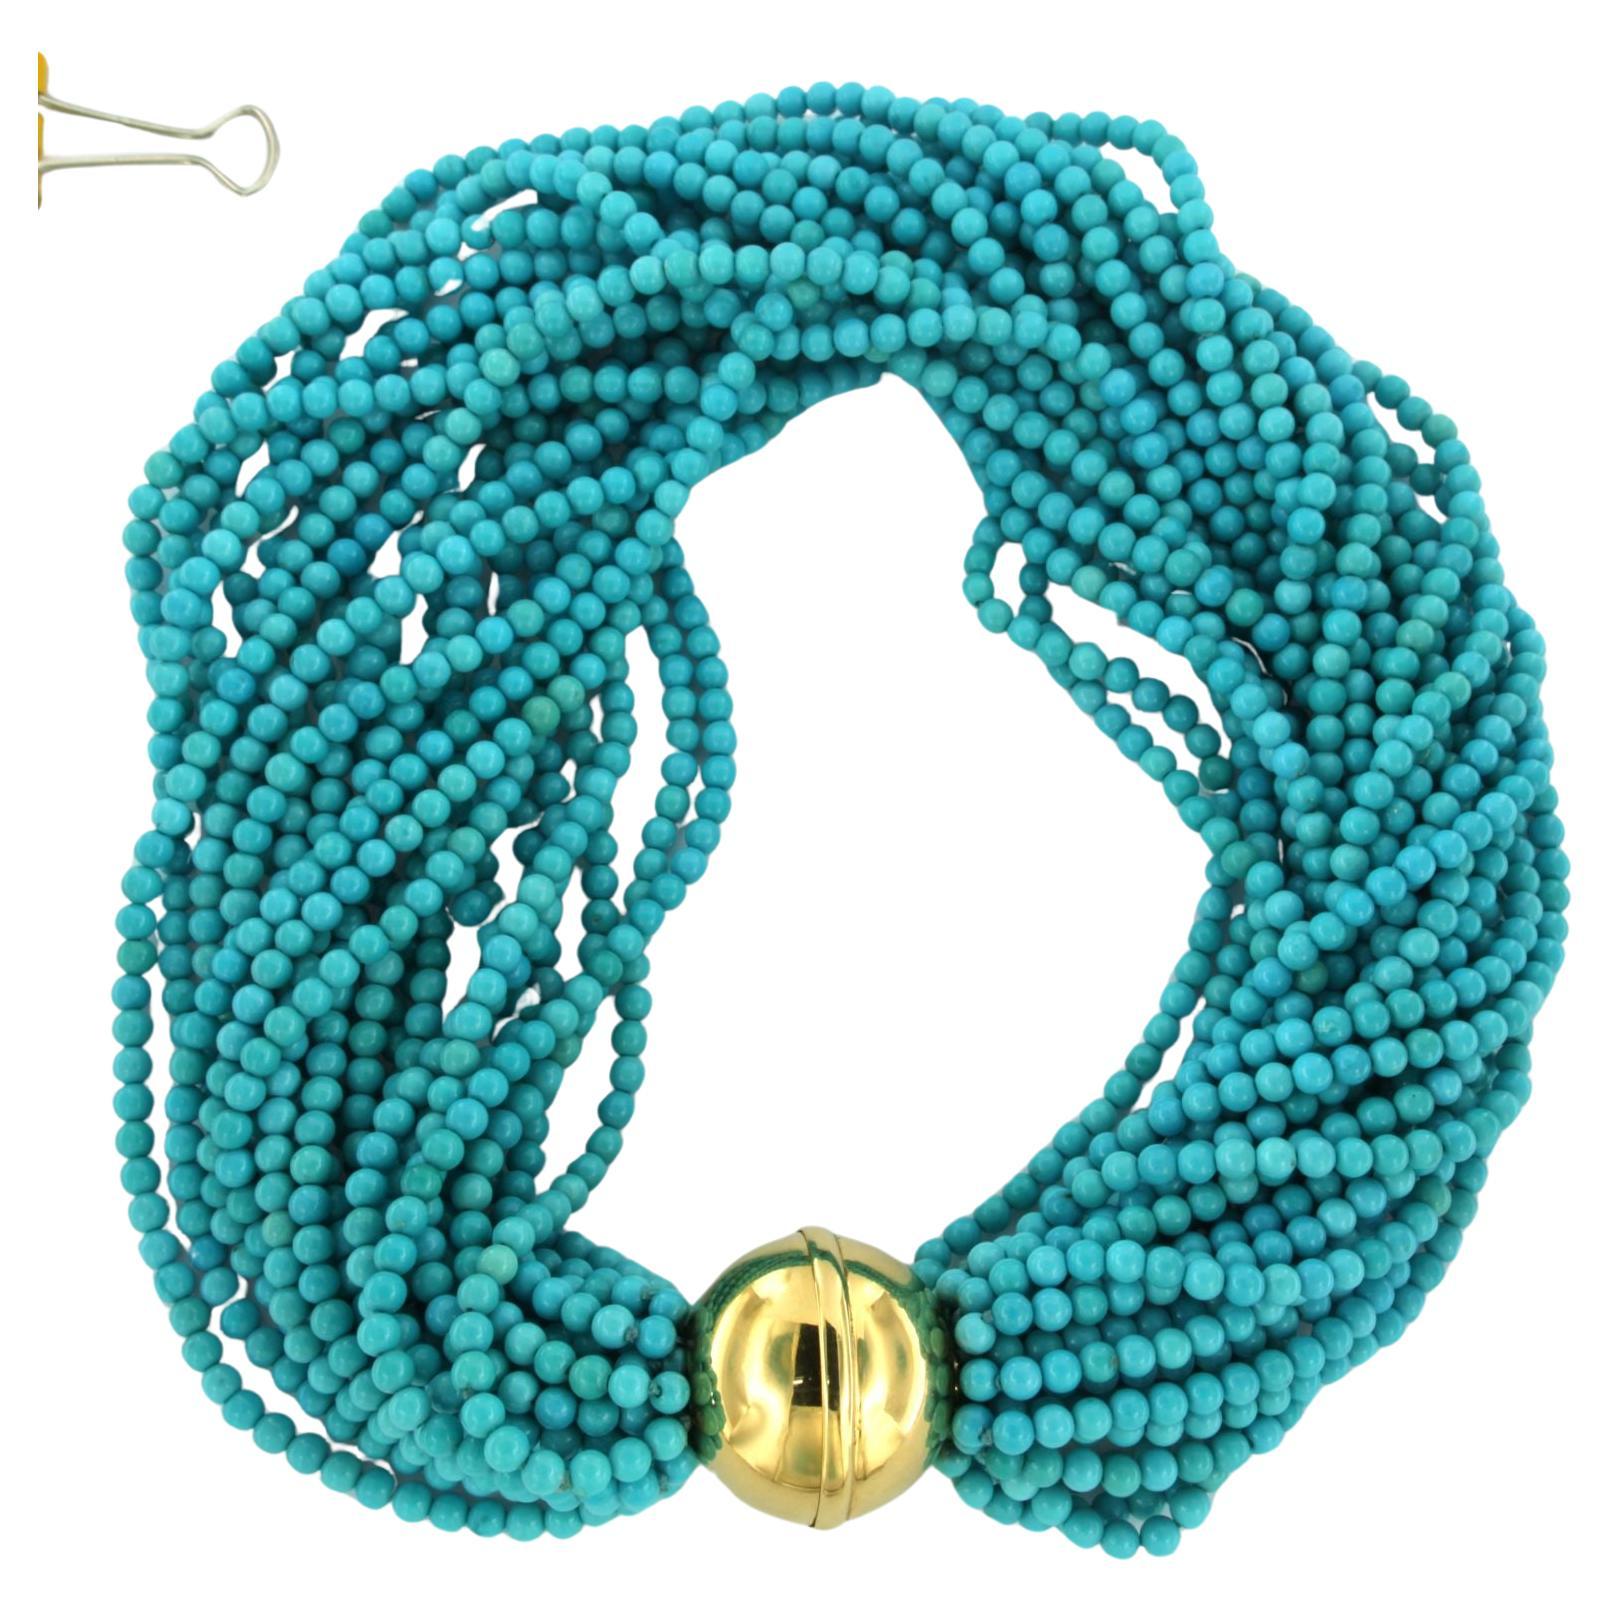 Necklace with turquoise beads on a 18k yellow gold lock